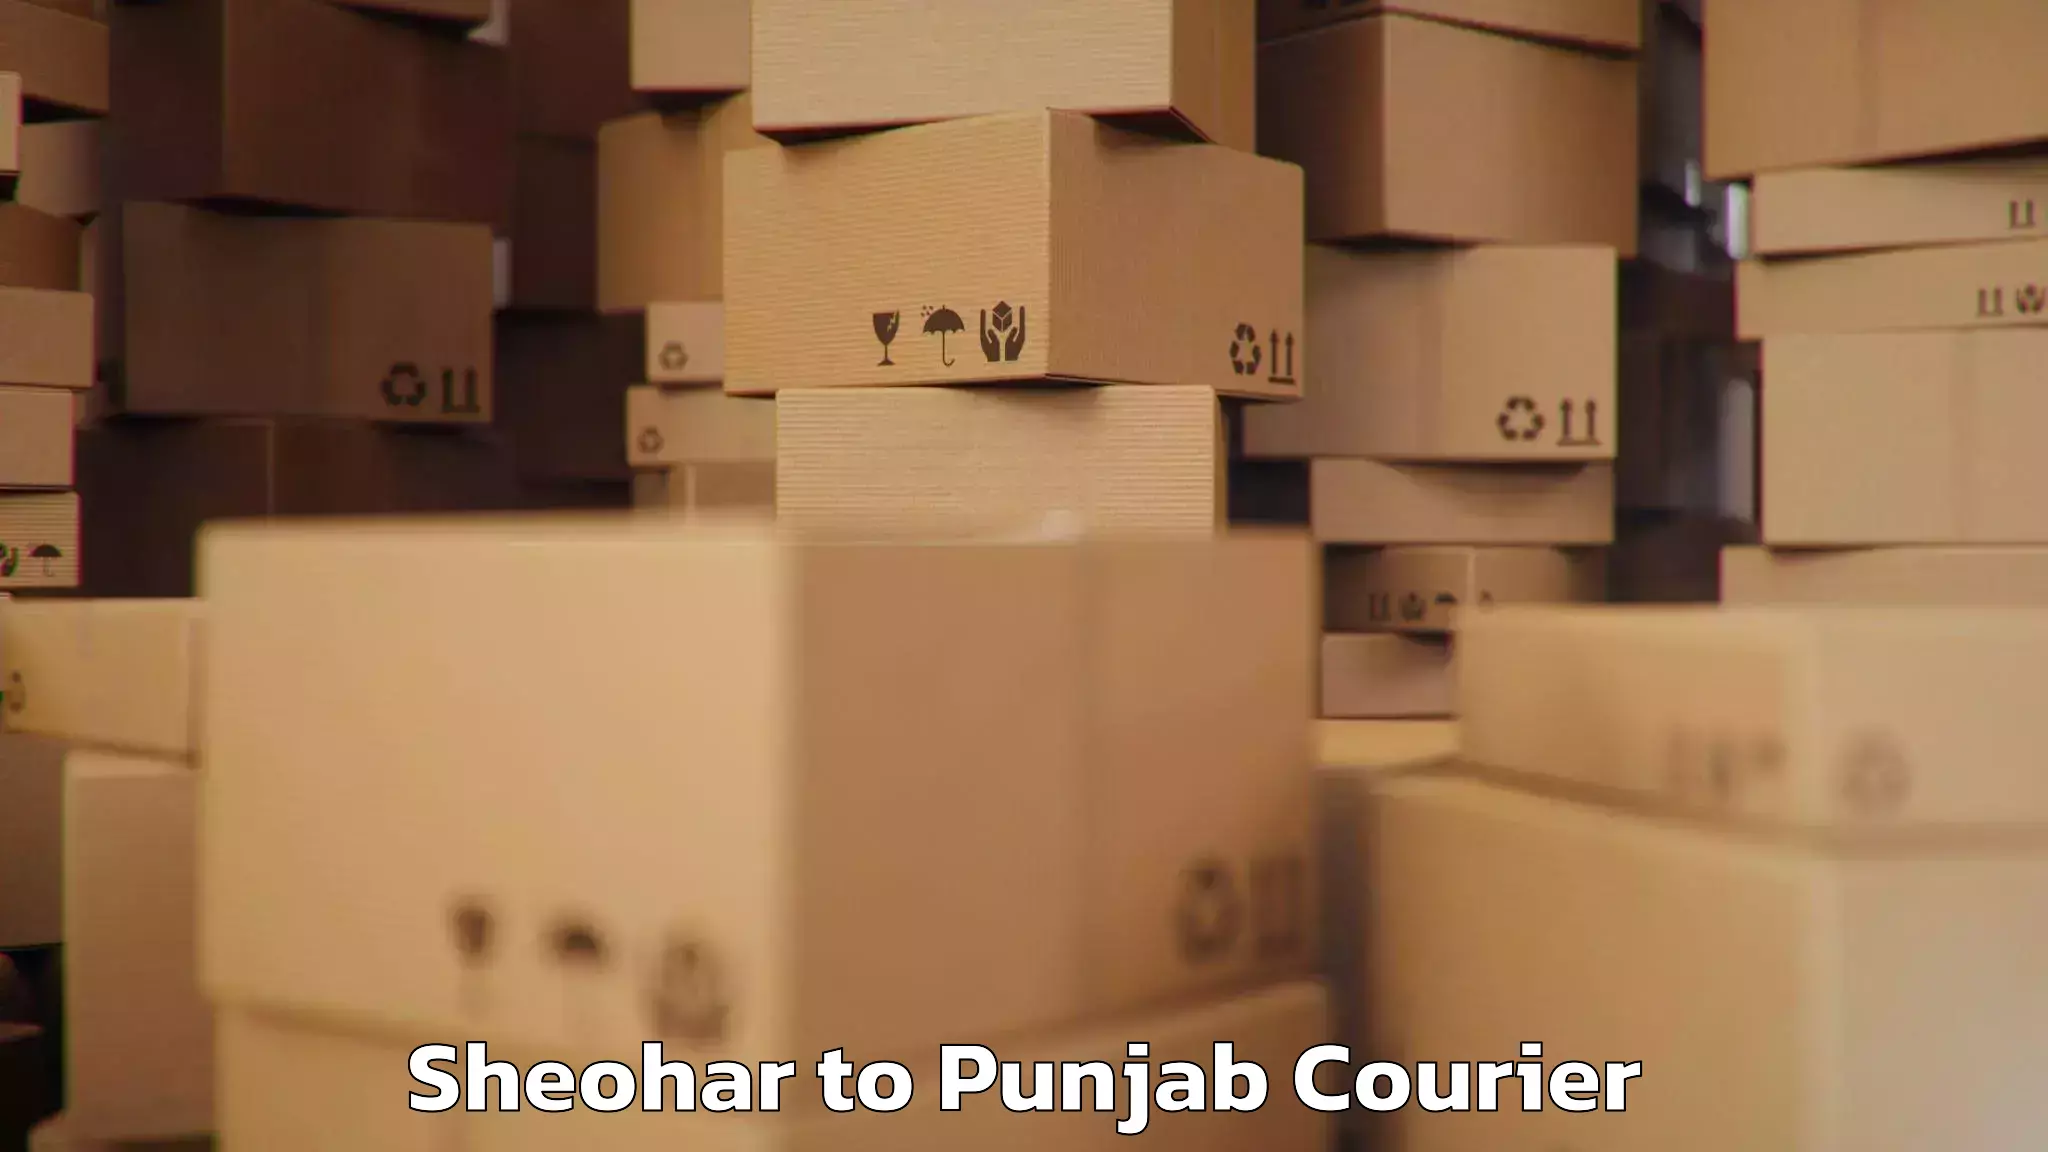 Baggage shipping service Sheohar to Patiala